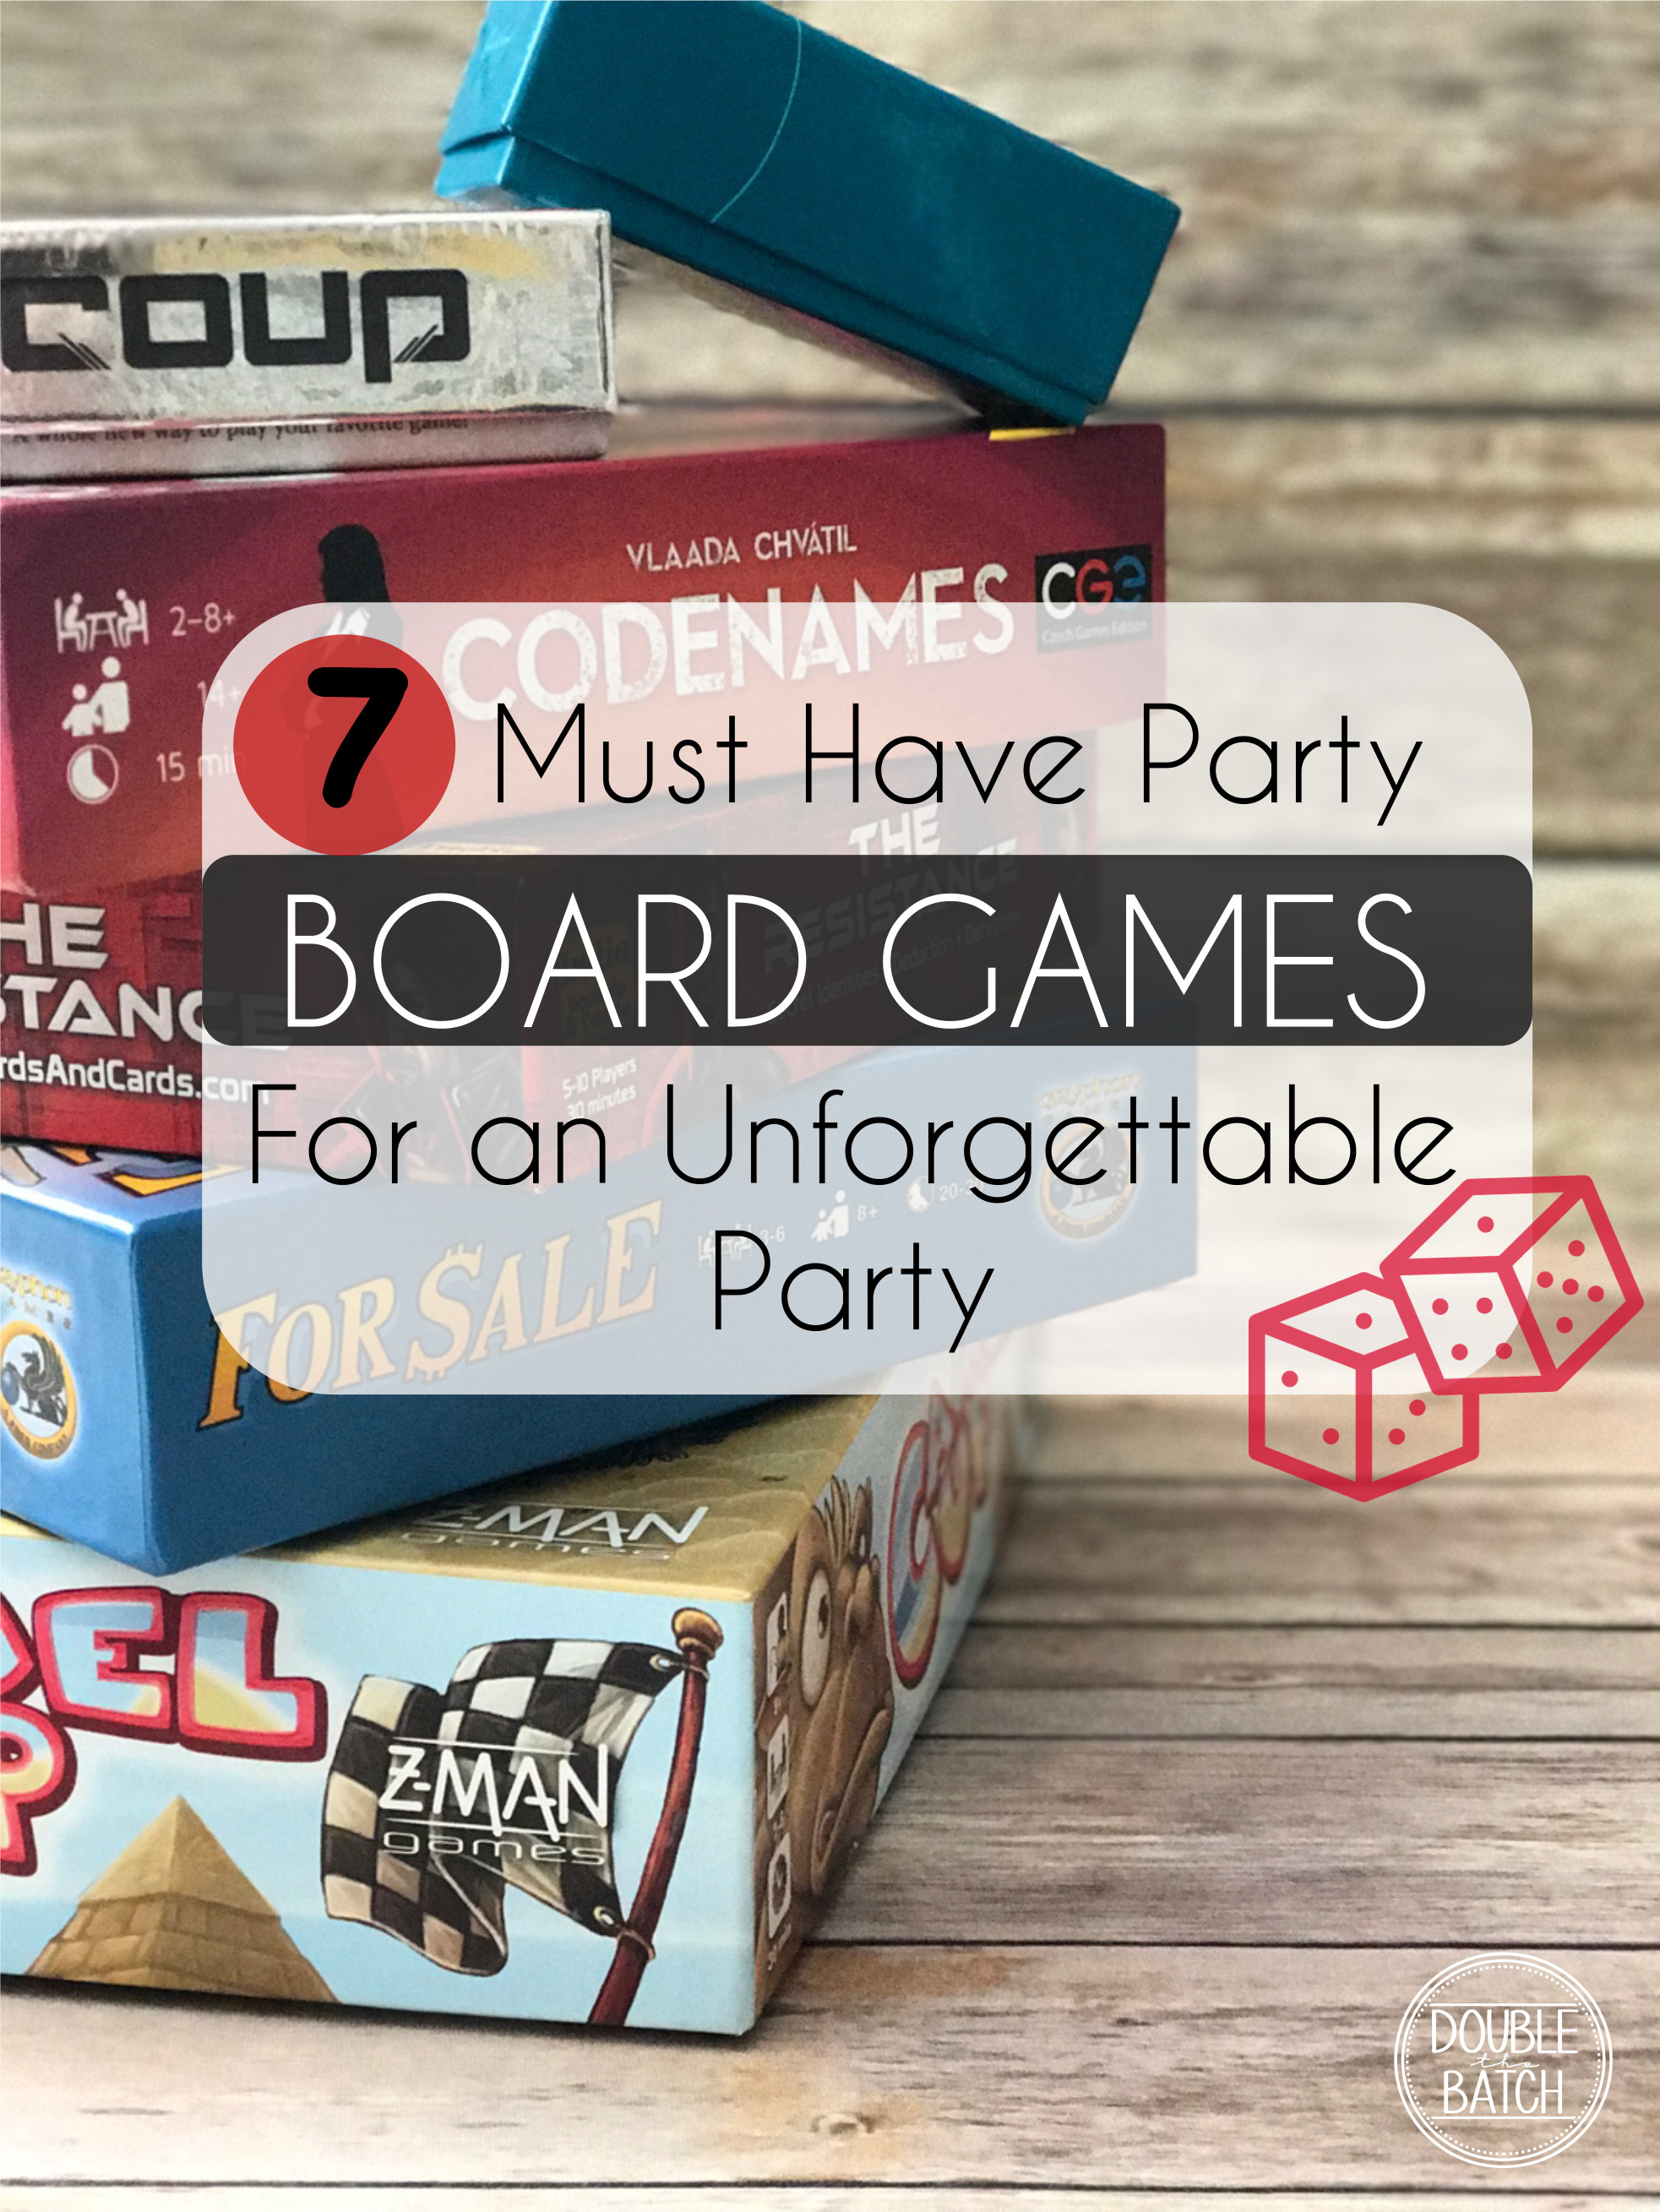 If you're looking for some new and exciting games to change things up a little check out these 7 must have party board games!